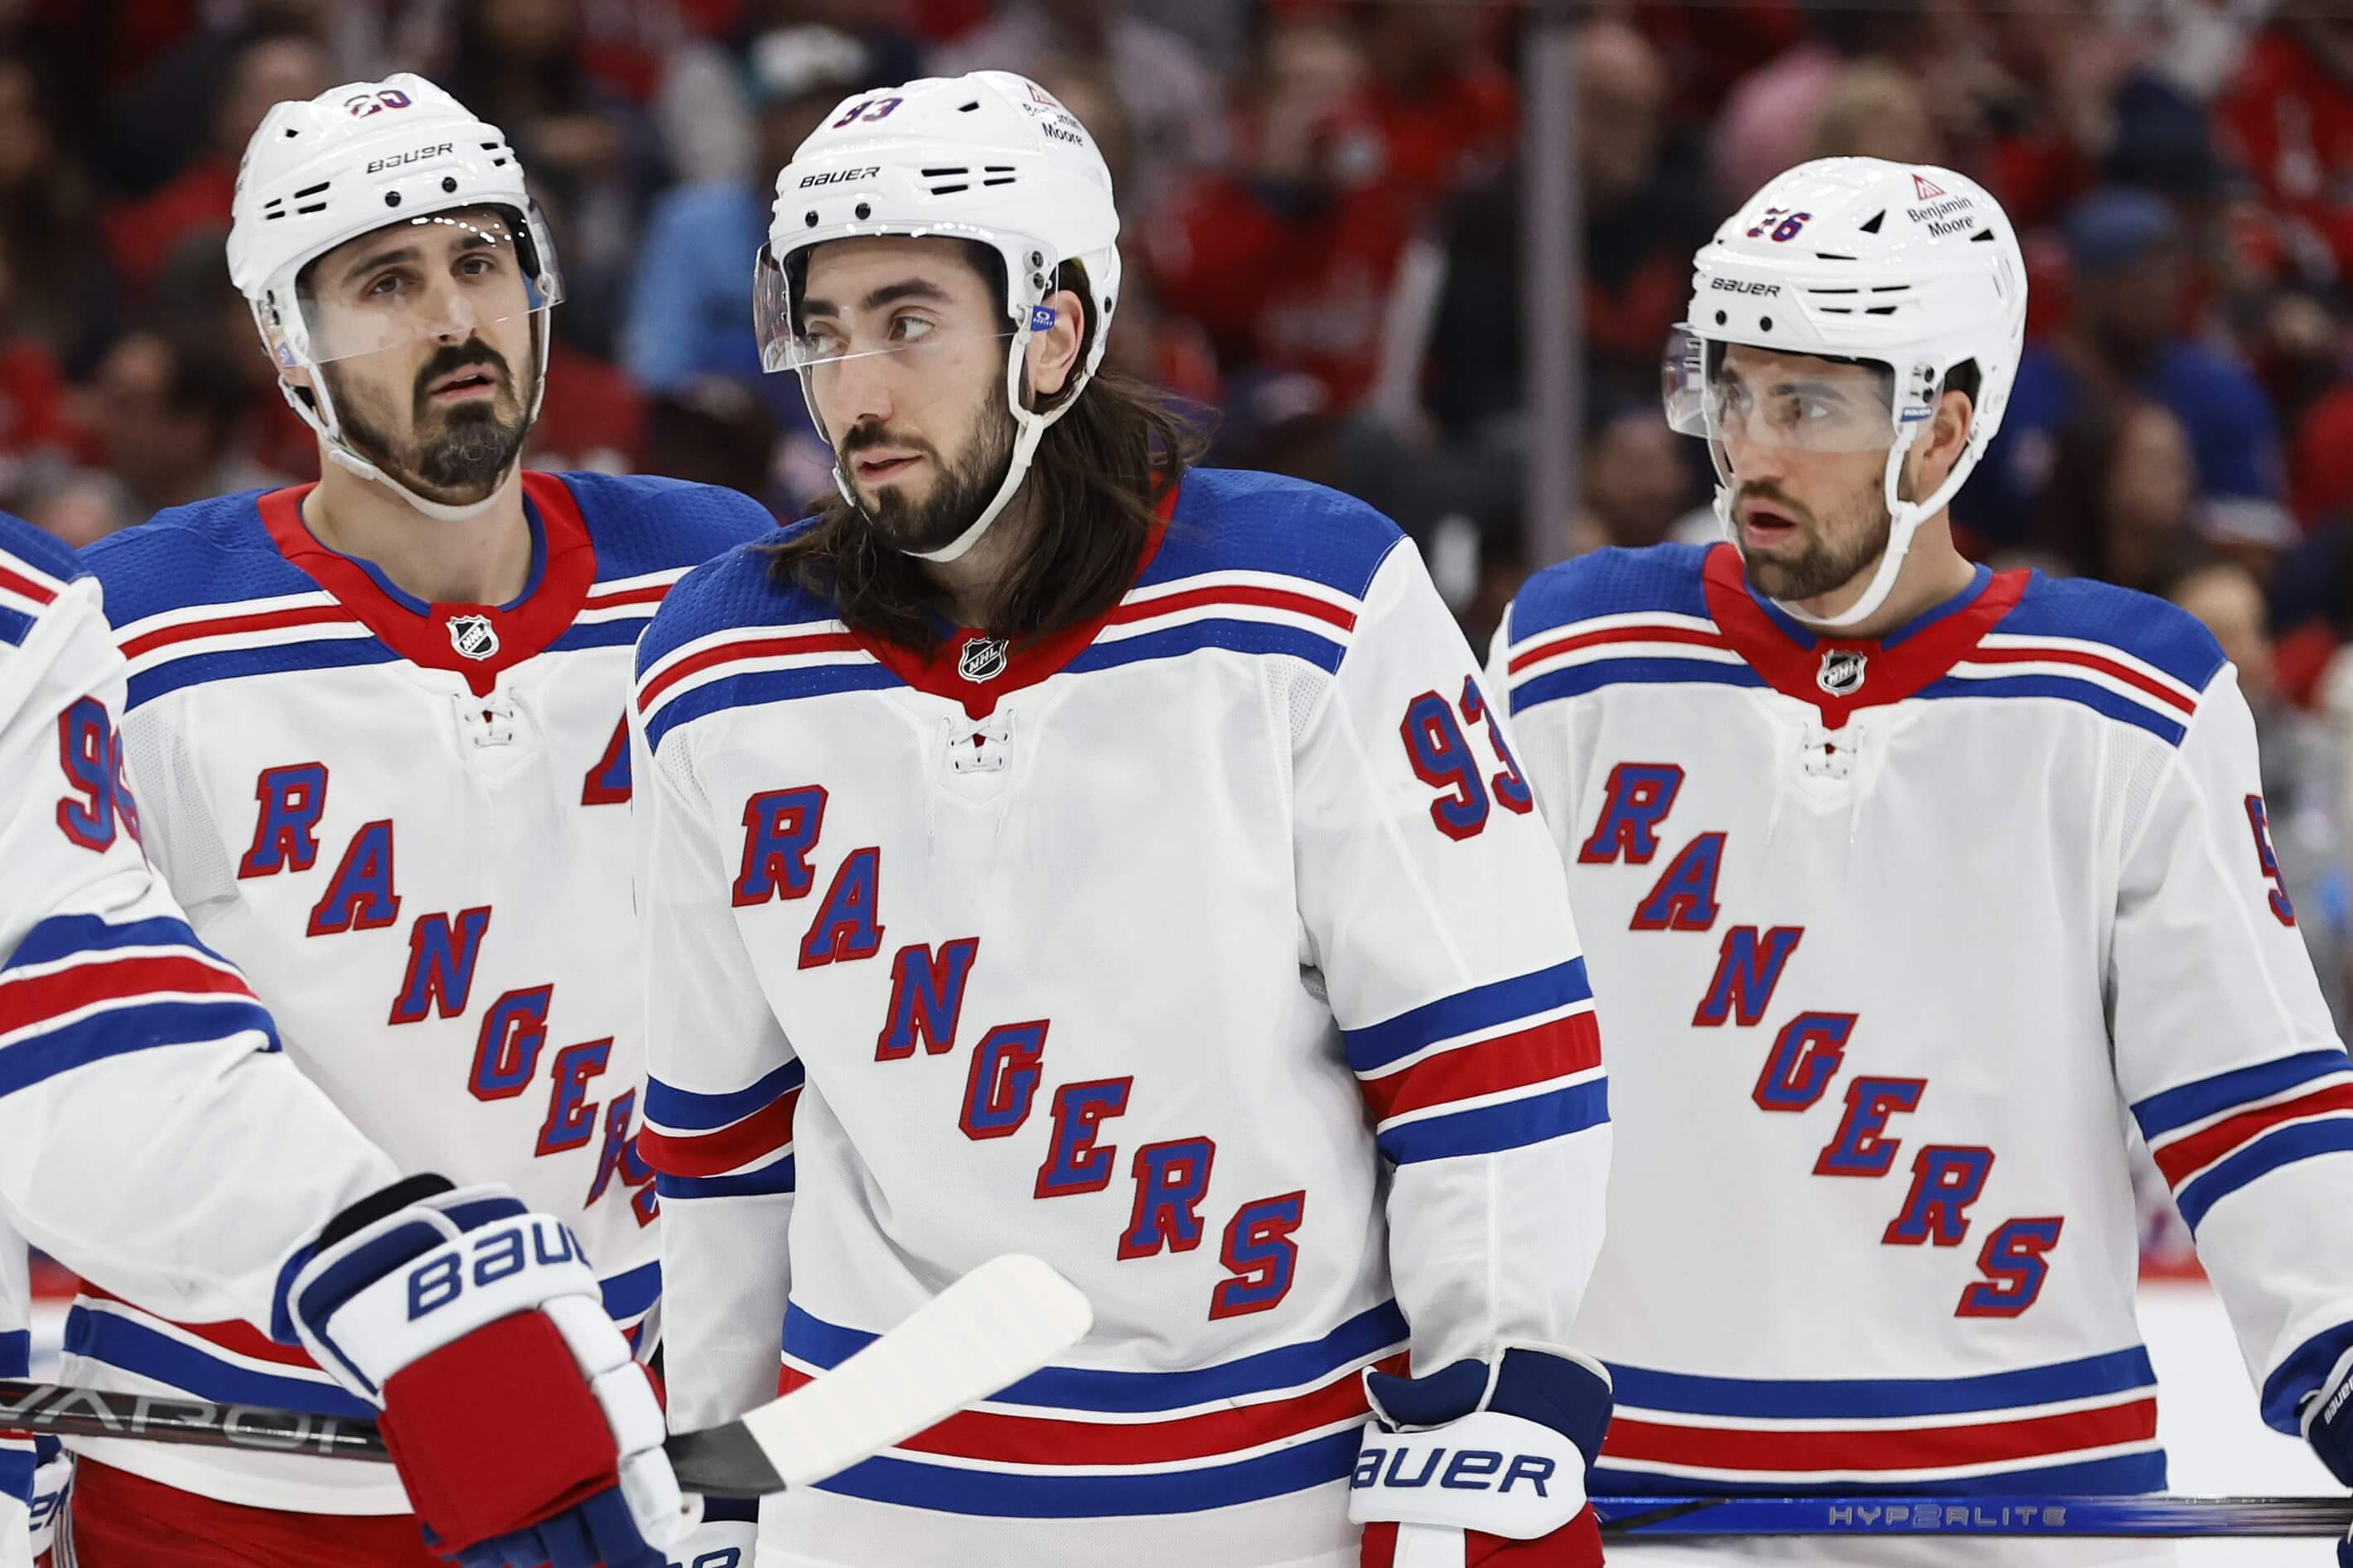 How To Bet - Panthers vs Rangers Same-Game Parlay Picks for Thursday's Game